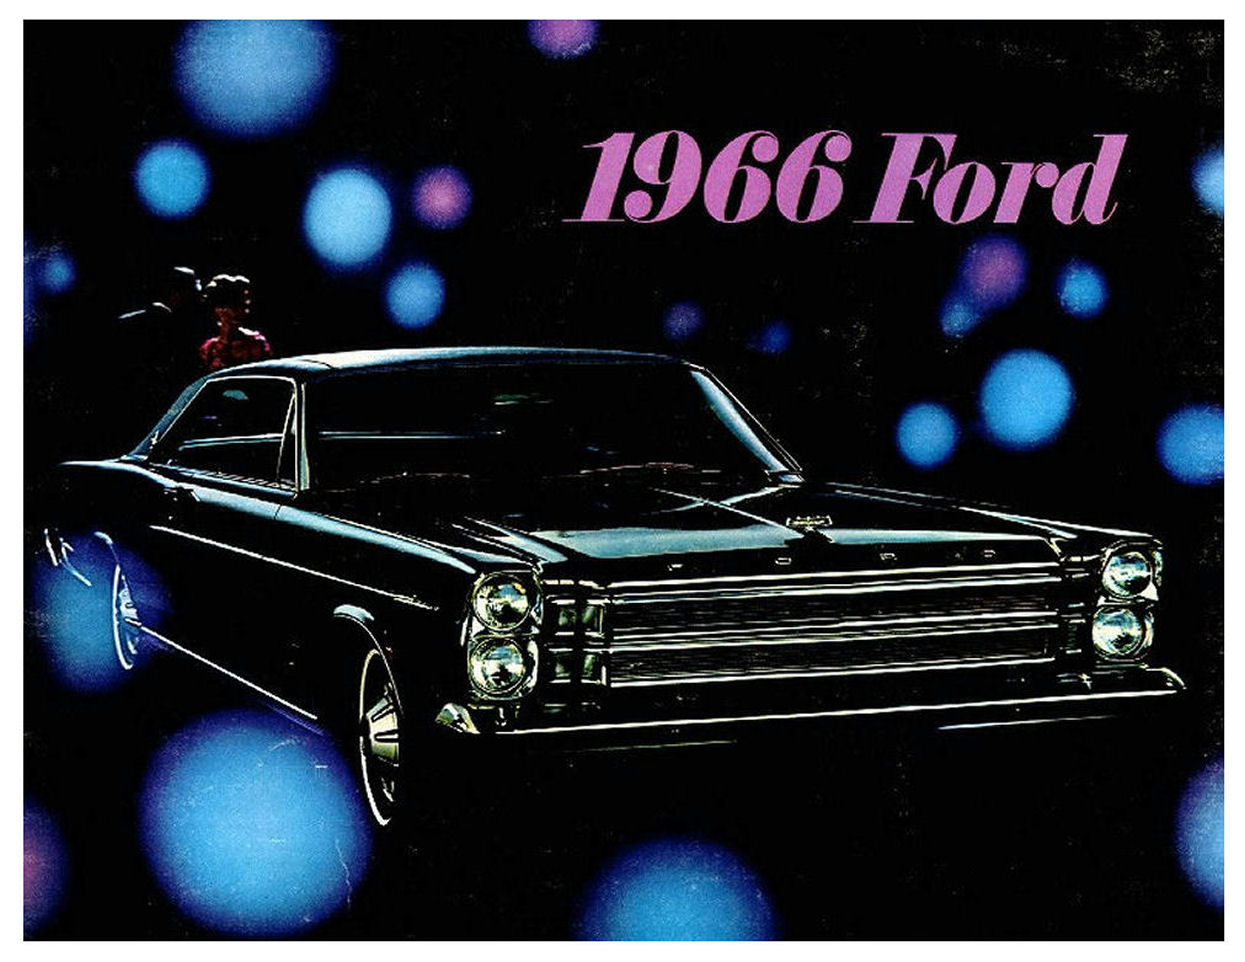 1966_Ford_Full_Size-01